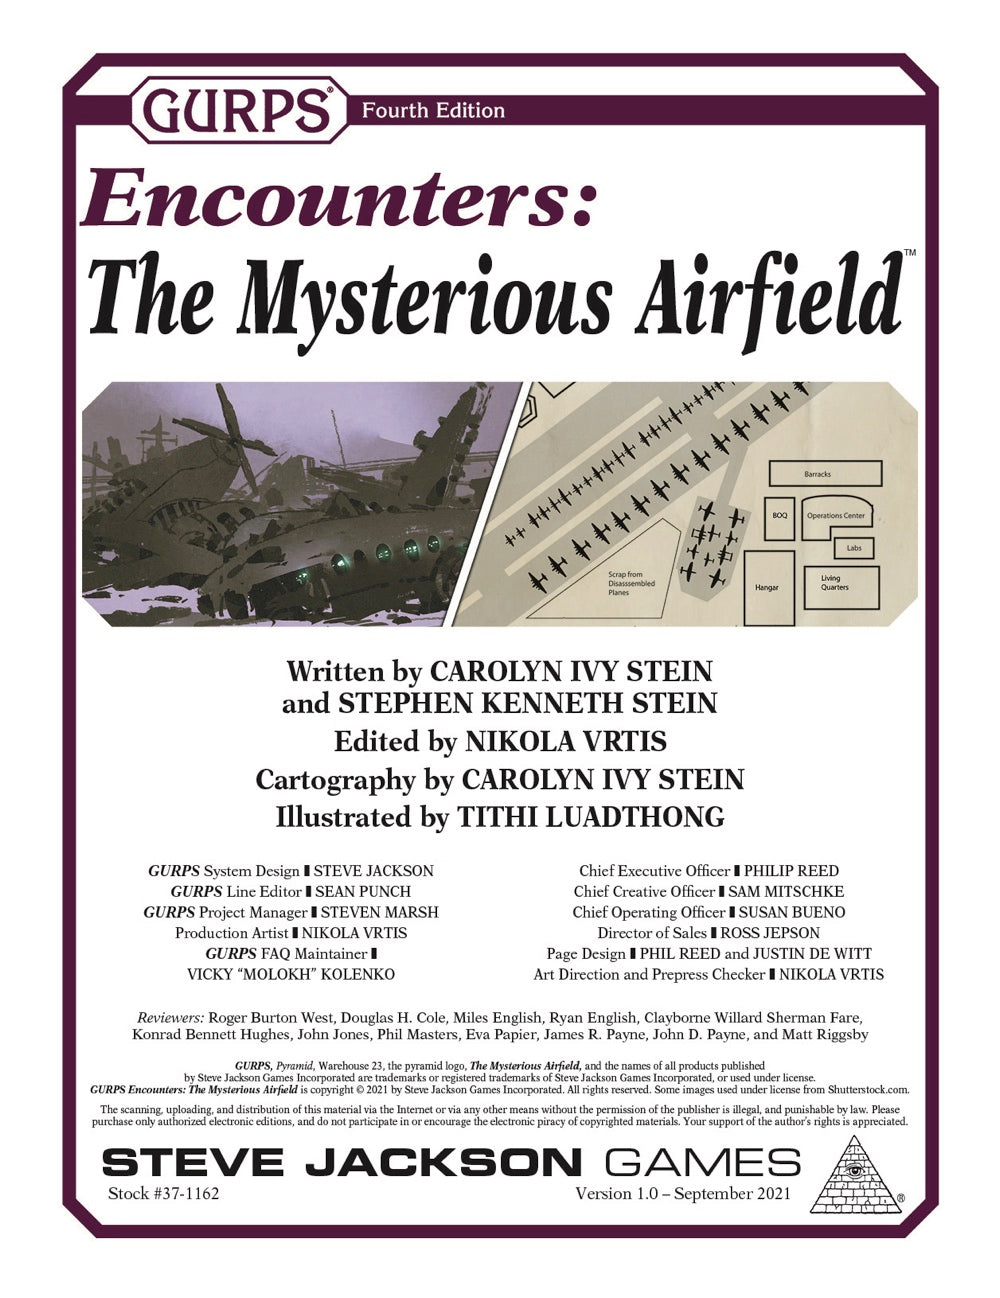 GURPS Encounters: The Mysterious Airfield